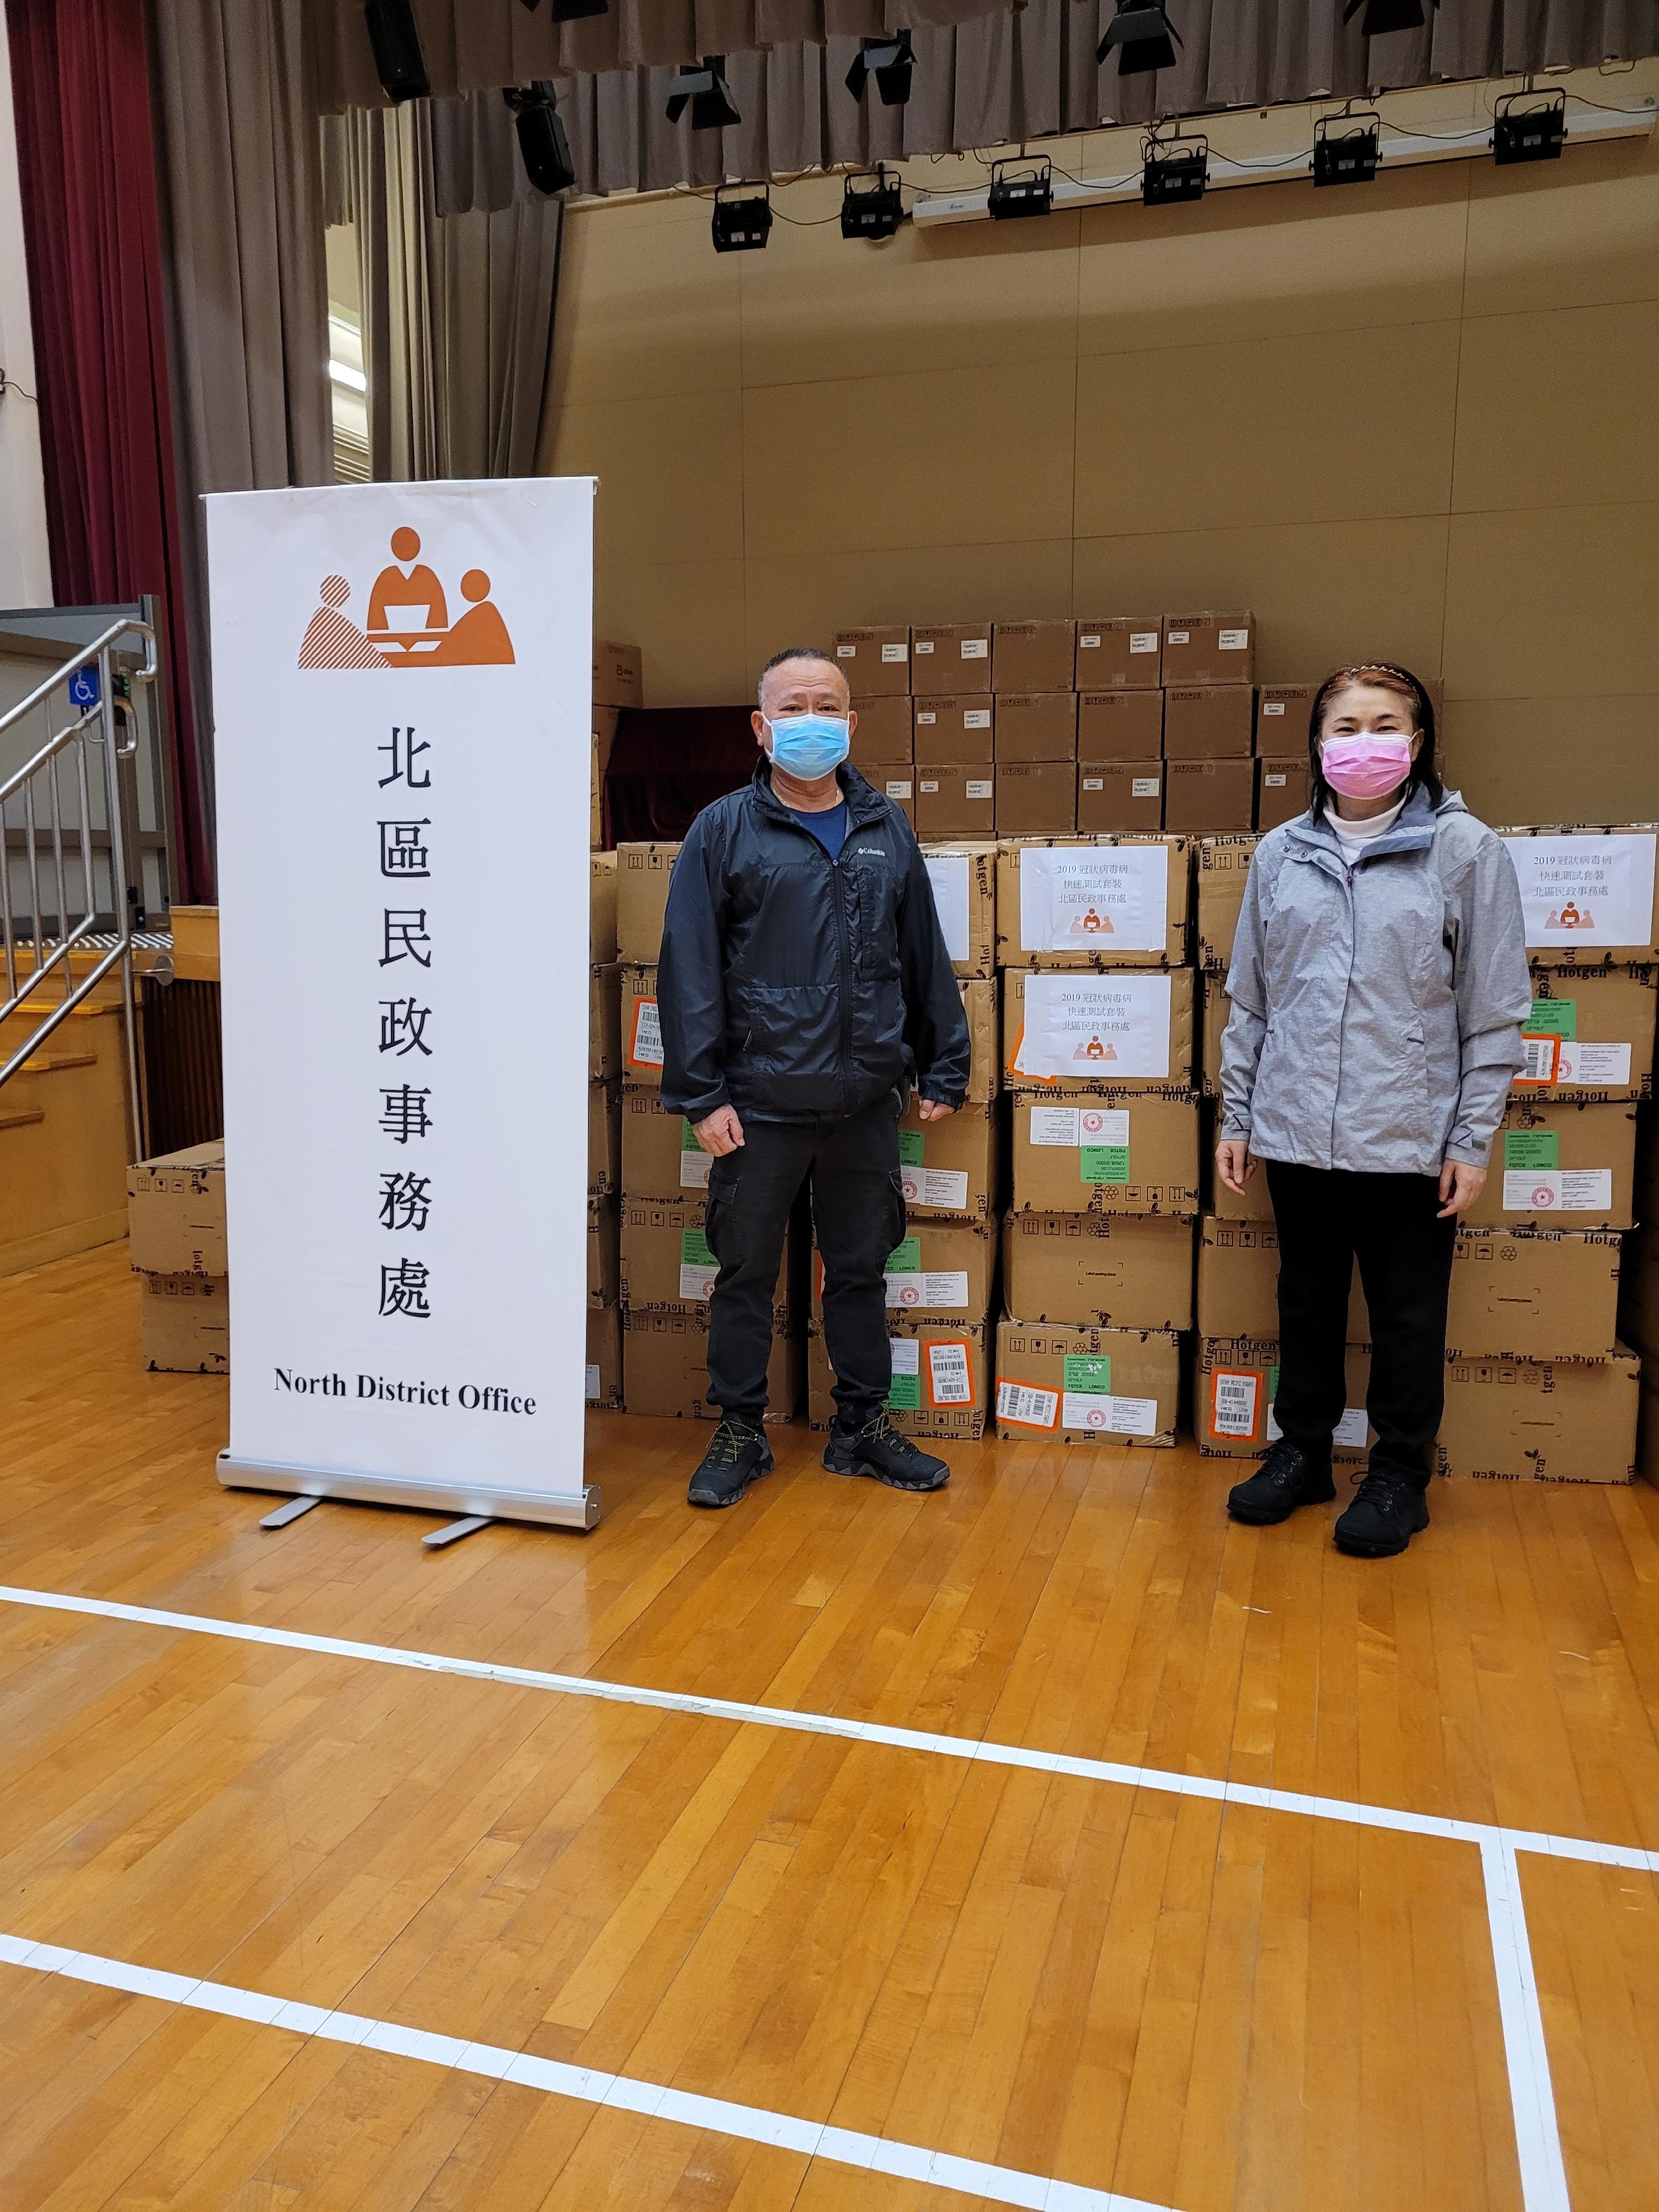 The North District Office today (March 24) distributed COVID-19 rapid test kits to households, cleansing workers and property management staff living and working in Wah Ming Estate for voluntary testing through the property management company.